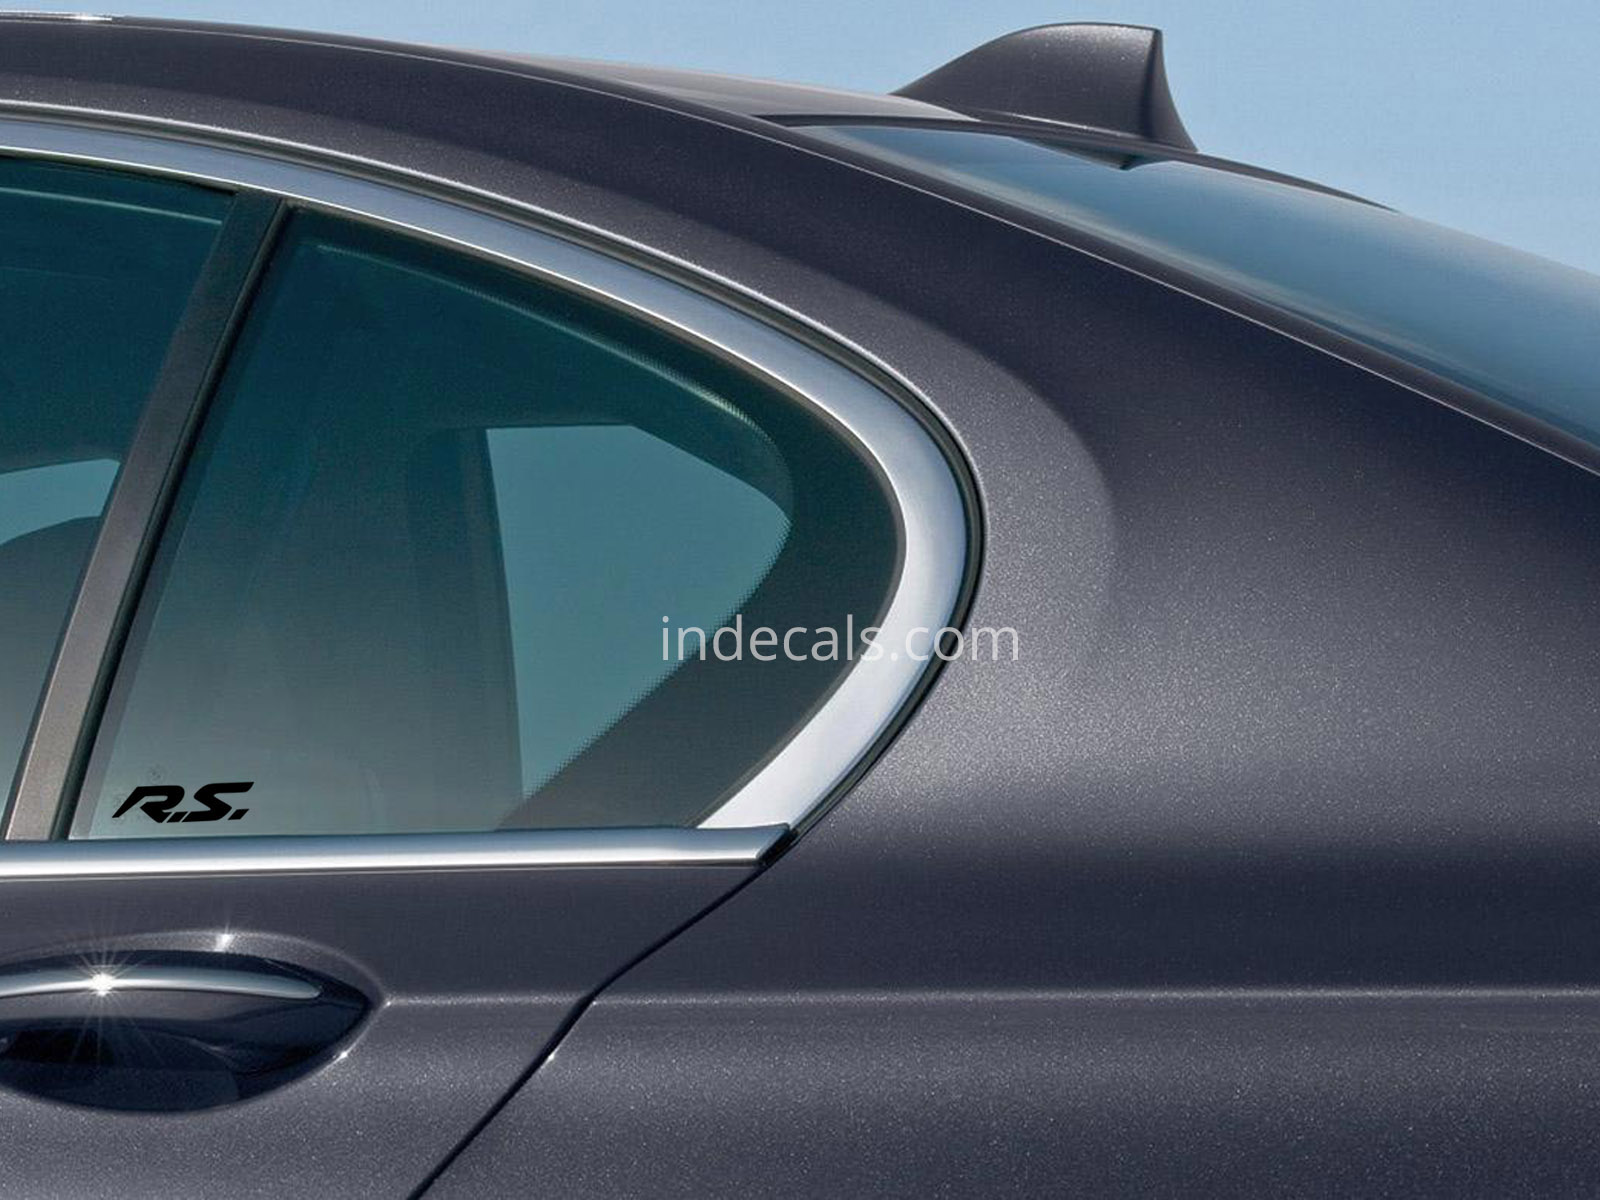 3 x Renault RS Stickers for Rear Window - Black